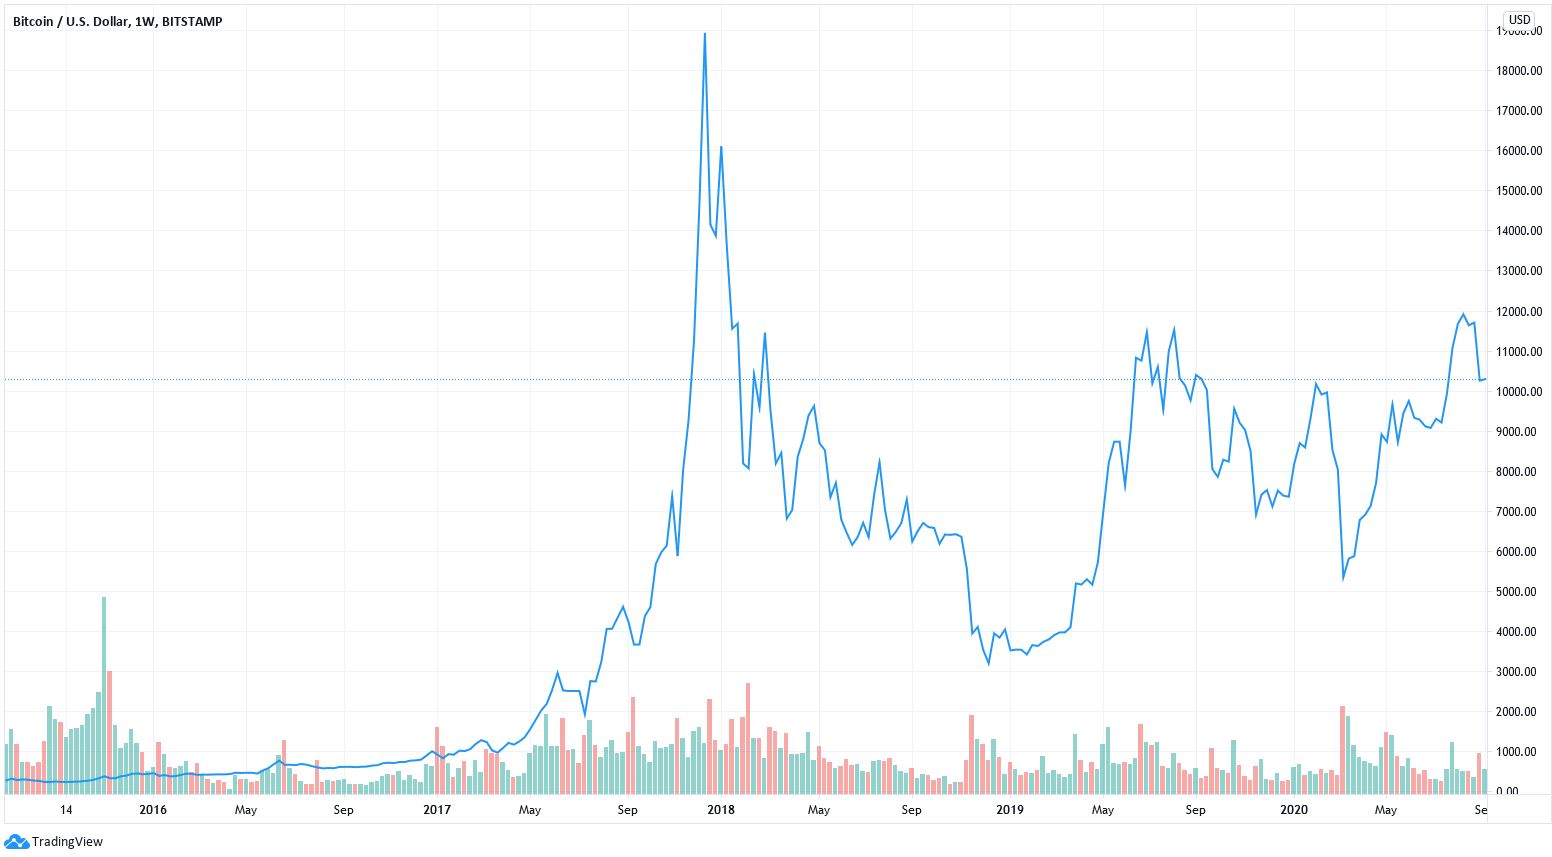 5 year projection for bitcoin